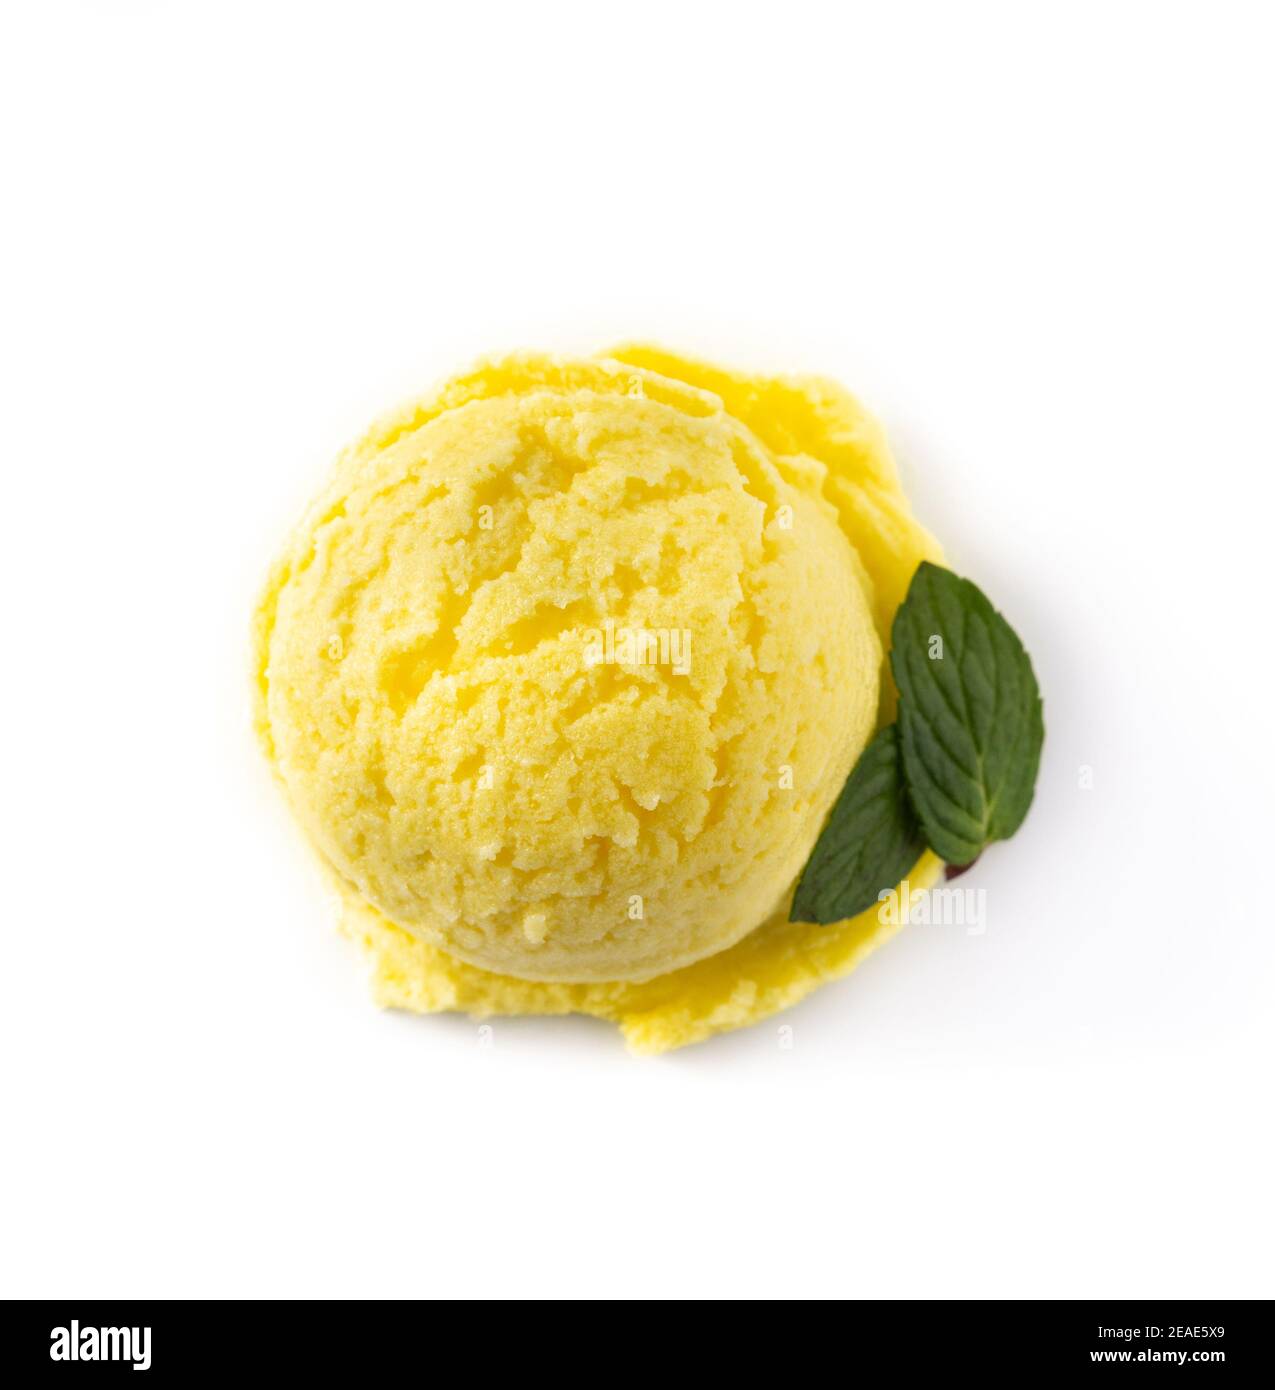 https://c8.alamy.com/comp/2EAE5X9/lemon-ice-cream-scoop-decorated-with-mint-leaves-isolated-on-white-background-2EAE5X9.jpg